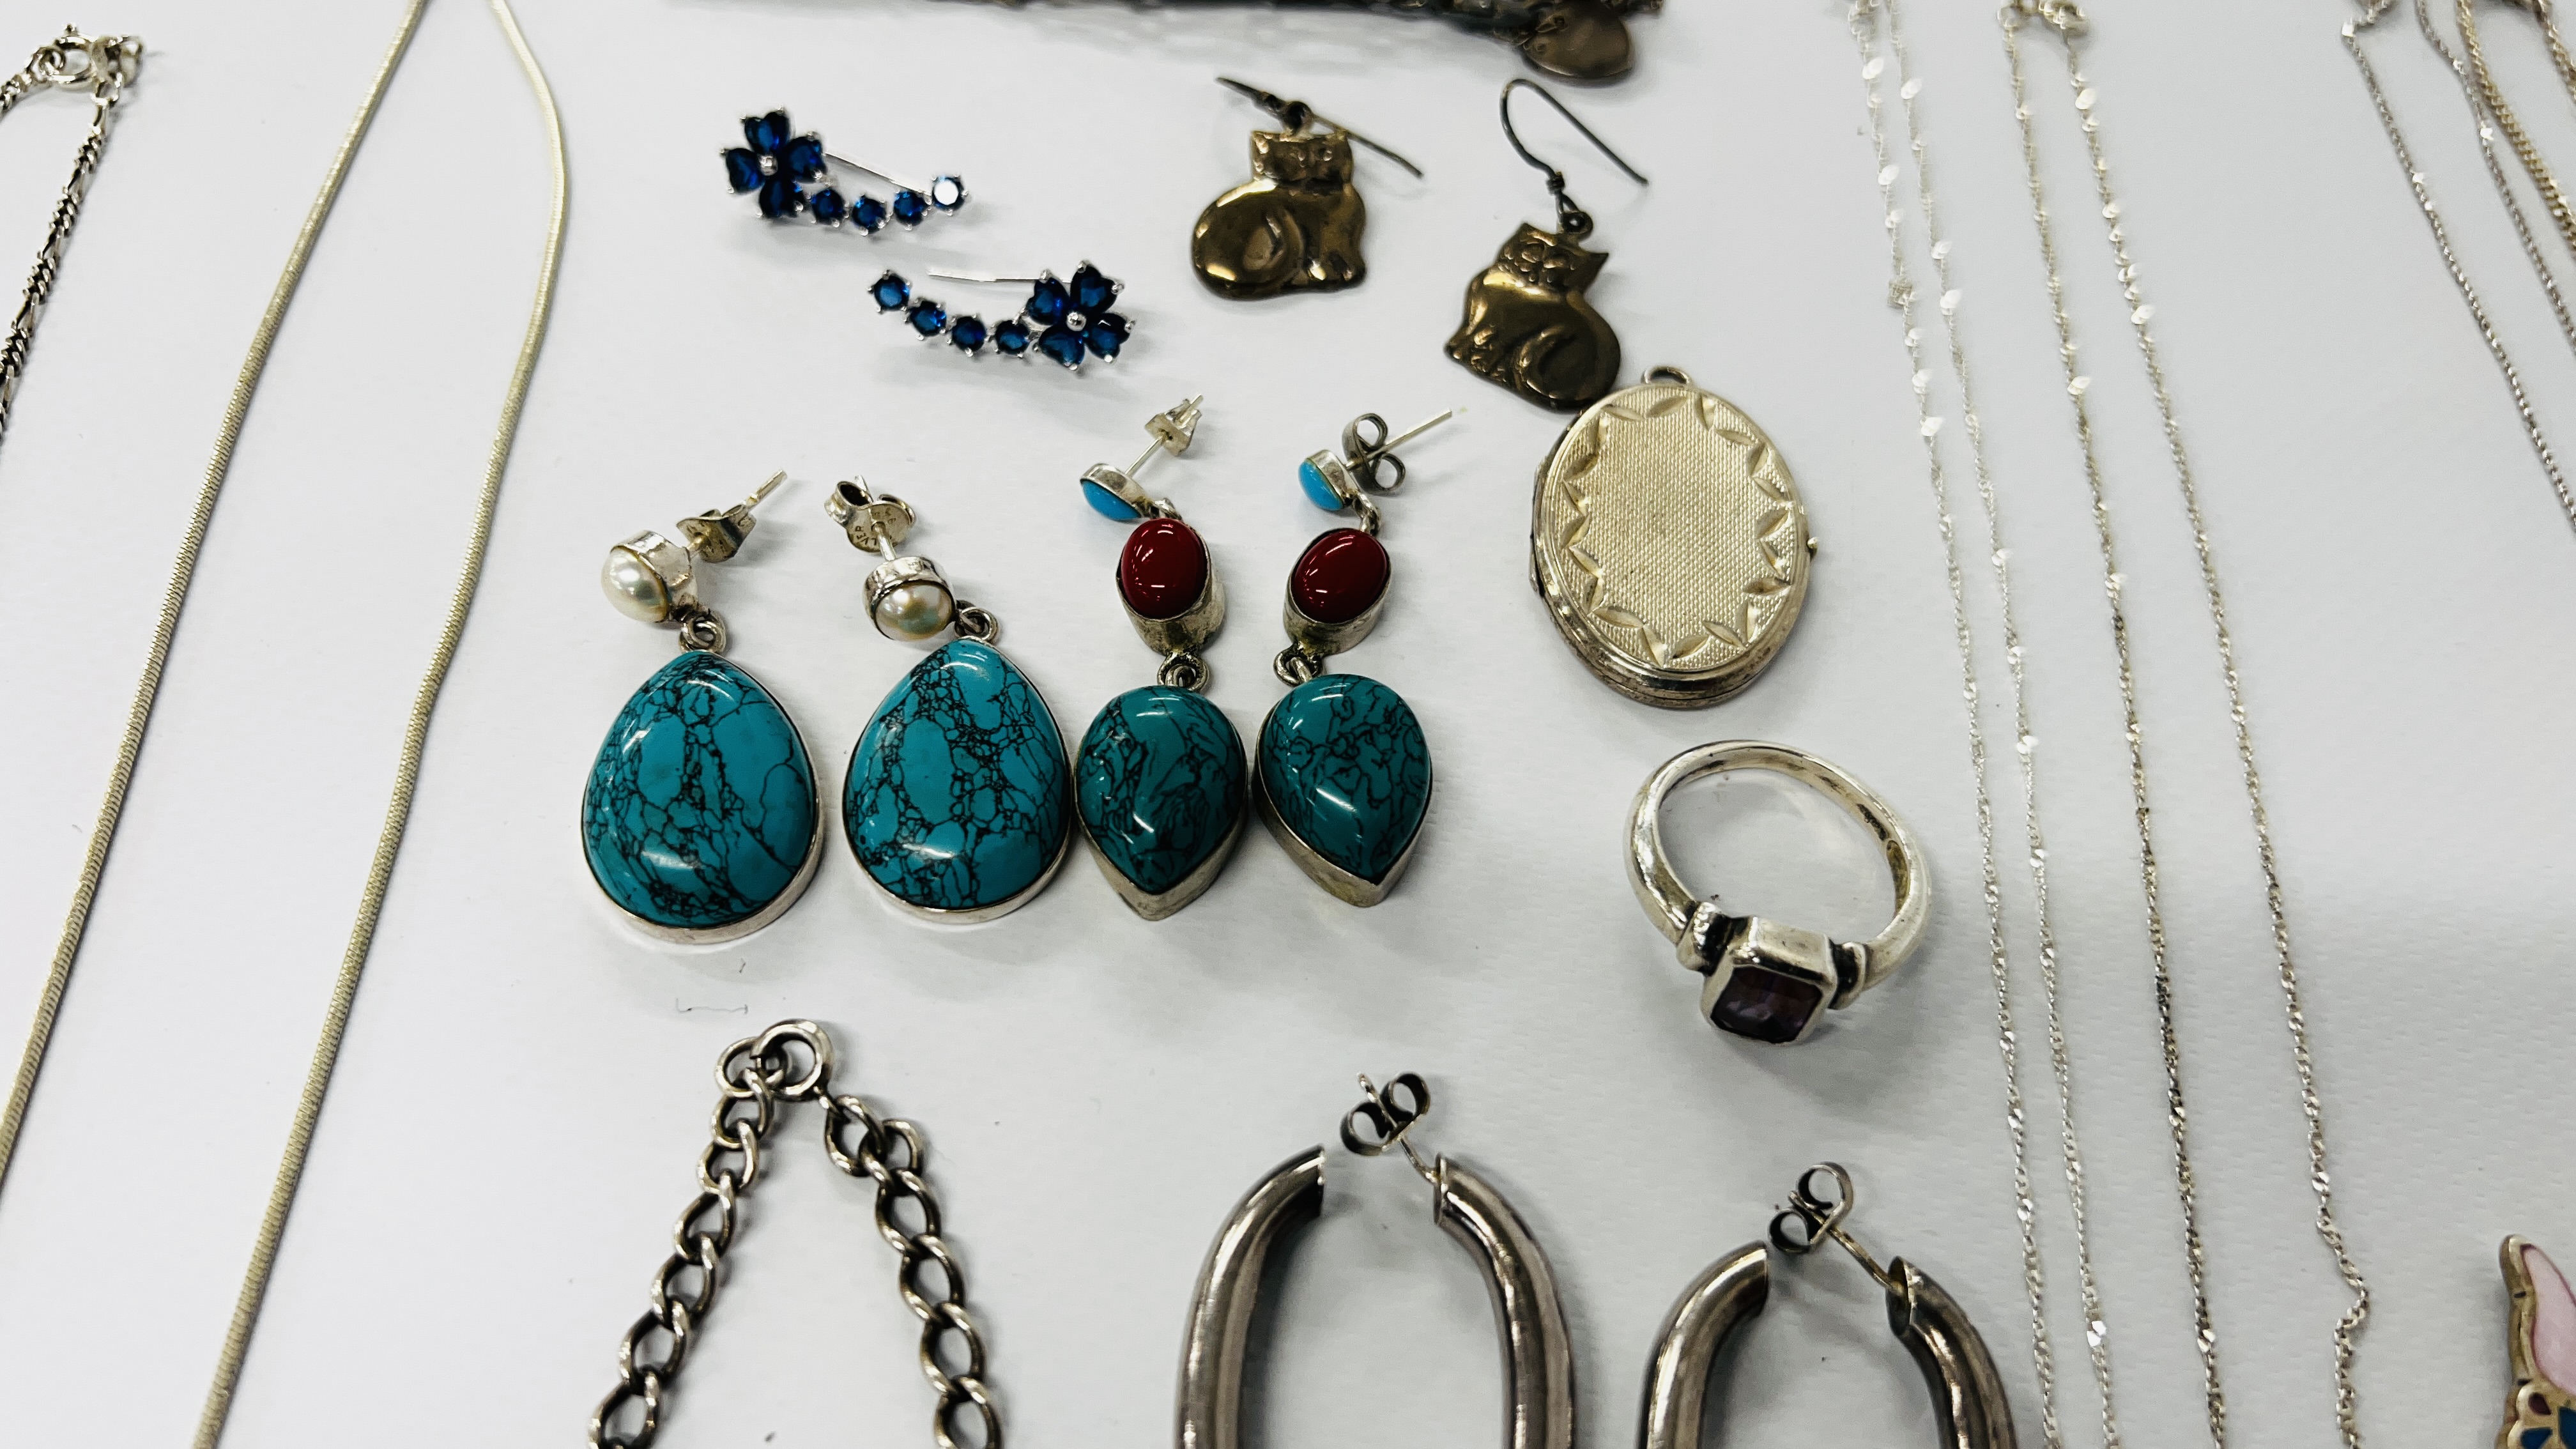 A TRAY OF SILVER, WHITE METAL PENDANTS, LOCKETS, BRACELETS AND EARRINGS. - Image 5 of 9